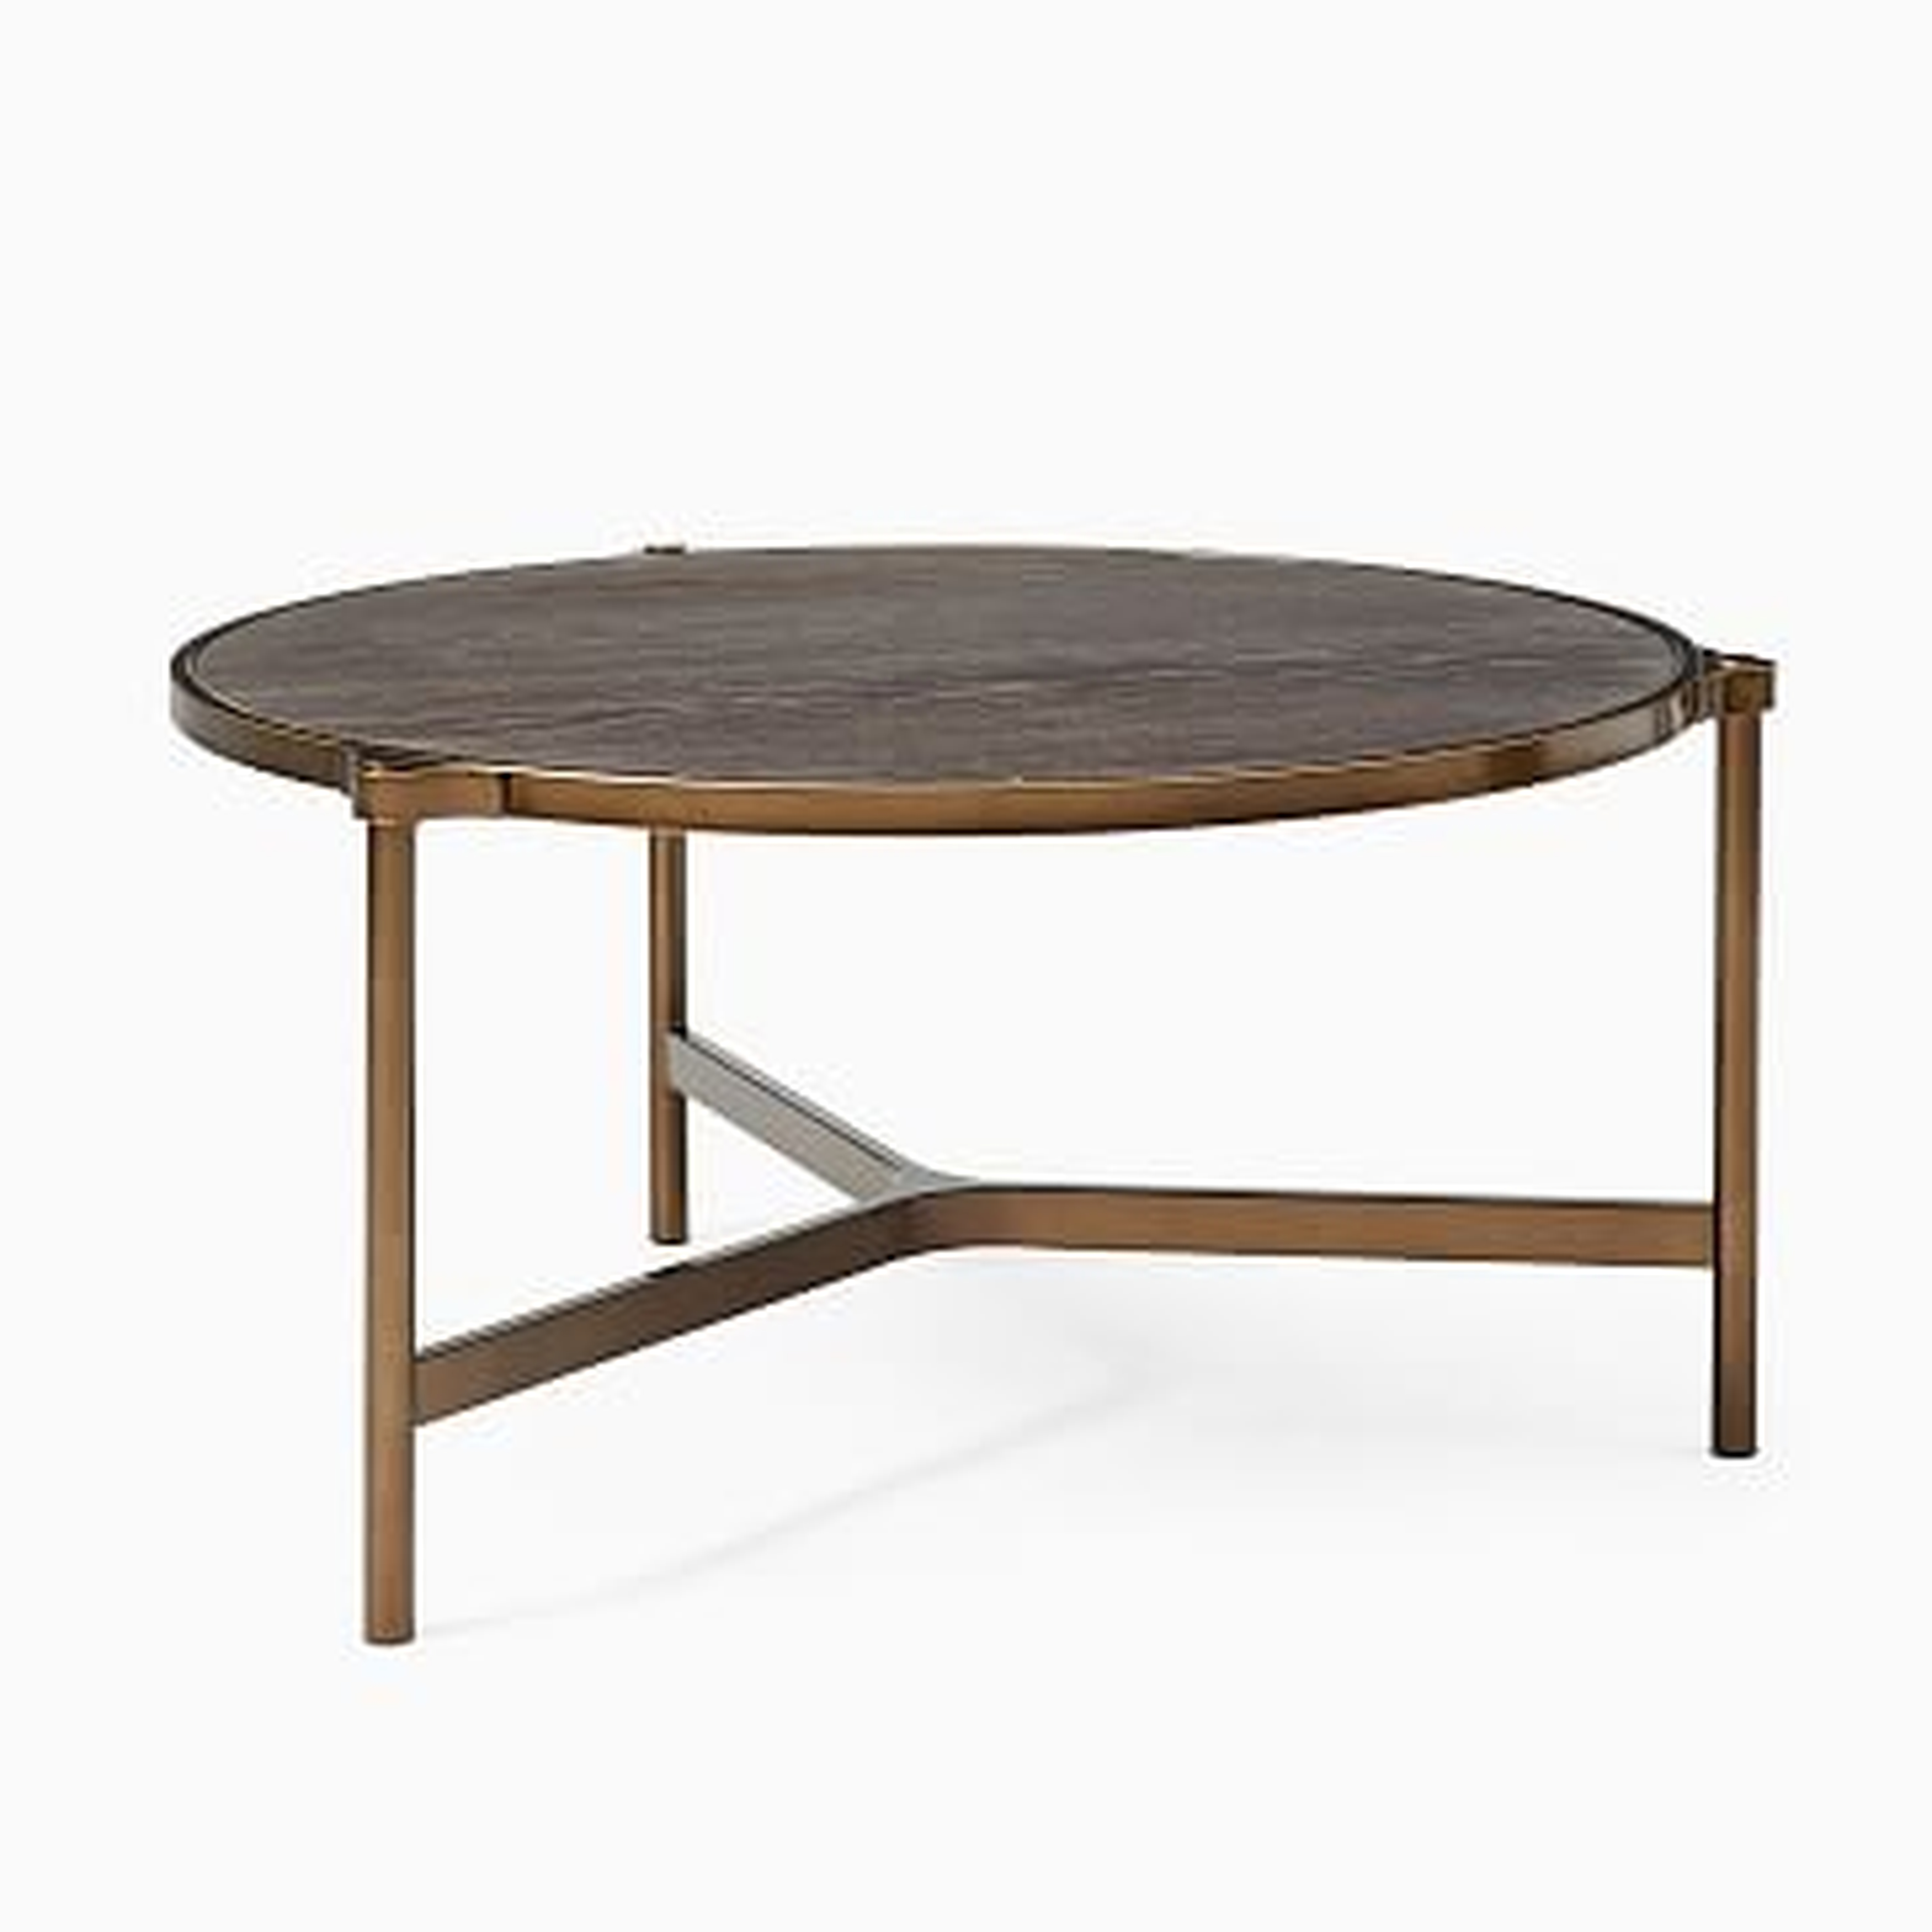 Mateo Collection Cerused Black Oil Rubbed Bronze 33 Inch Coffee Table - West Elm